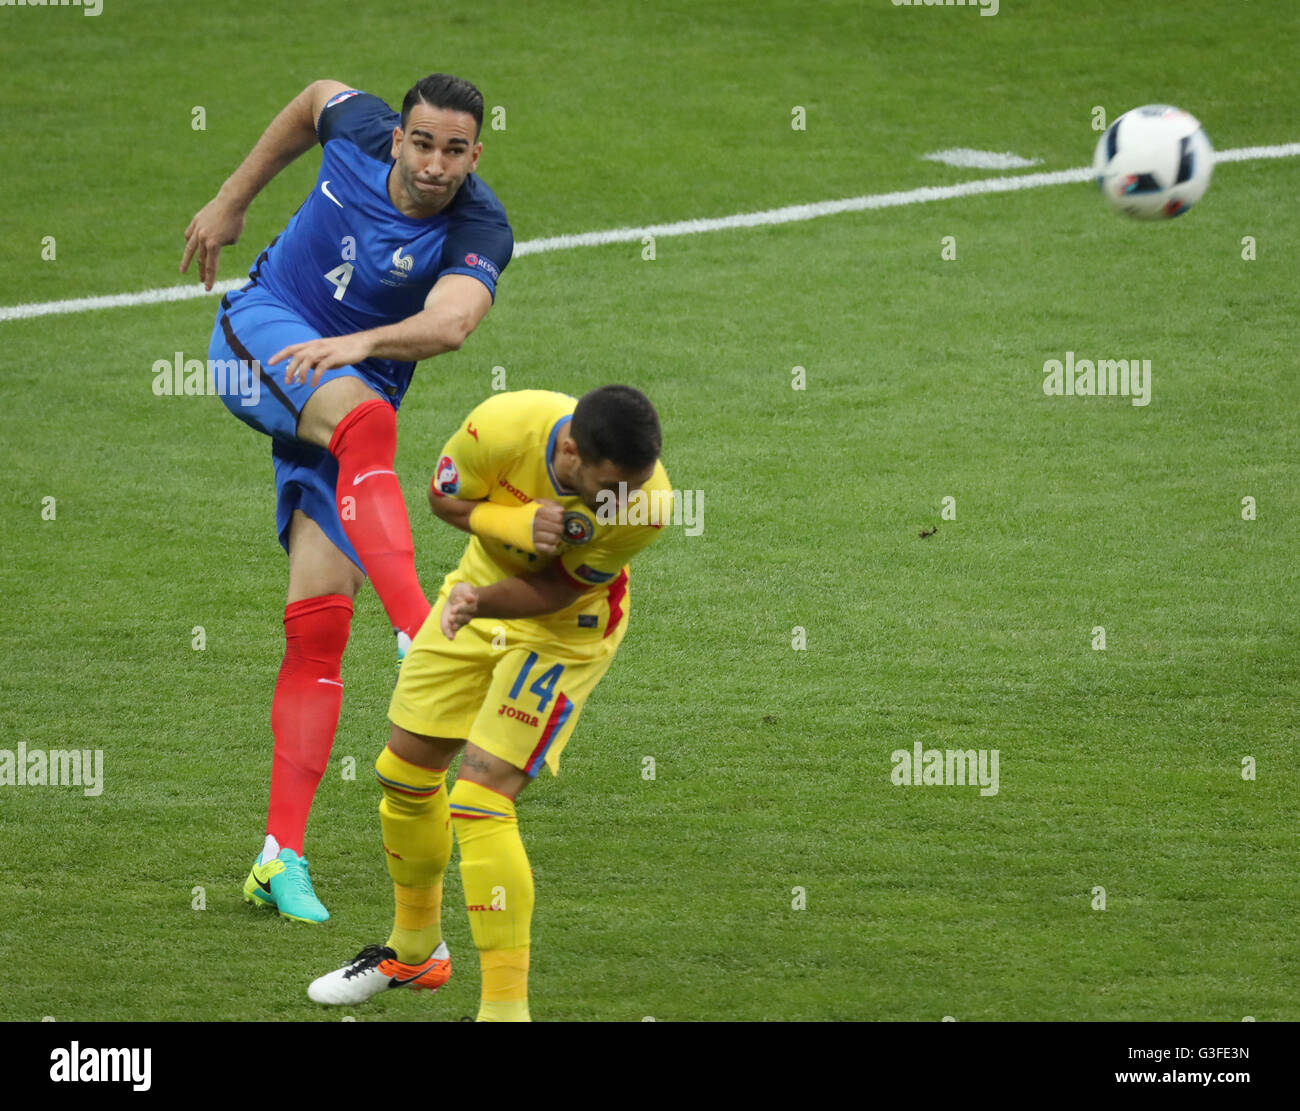 Paris, France. 10th June, 2016. Adil Rami (L) of France competes during the Euro 2016 Group A soccer match between France and Romania in Paris, France, June 10, 2016. Credit:  Bai Xuefei/Xinhua/Alamy Live News Stock Photo